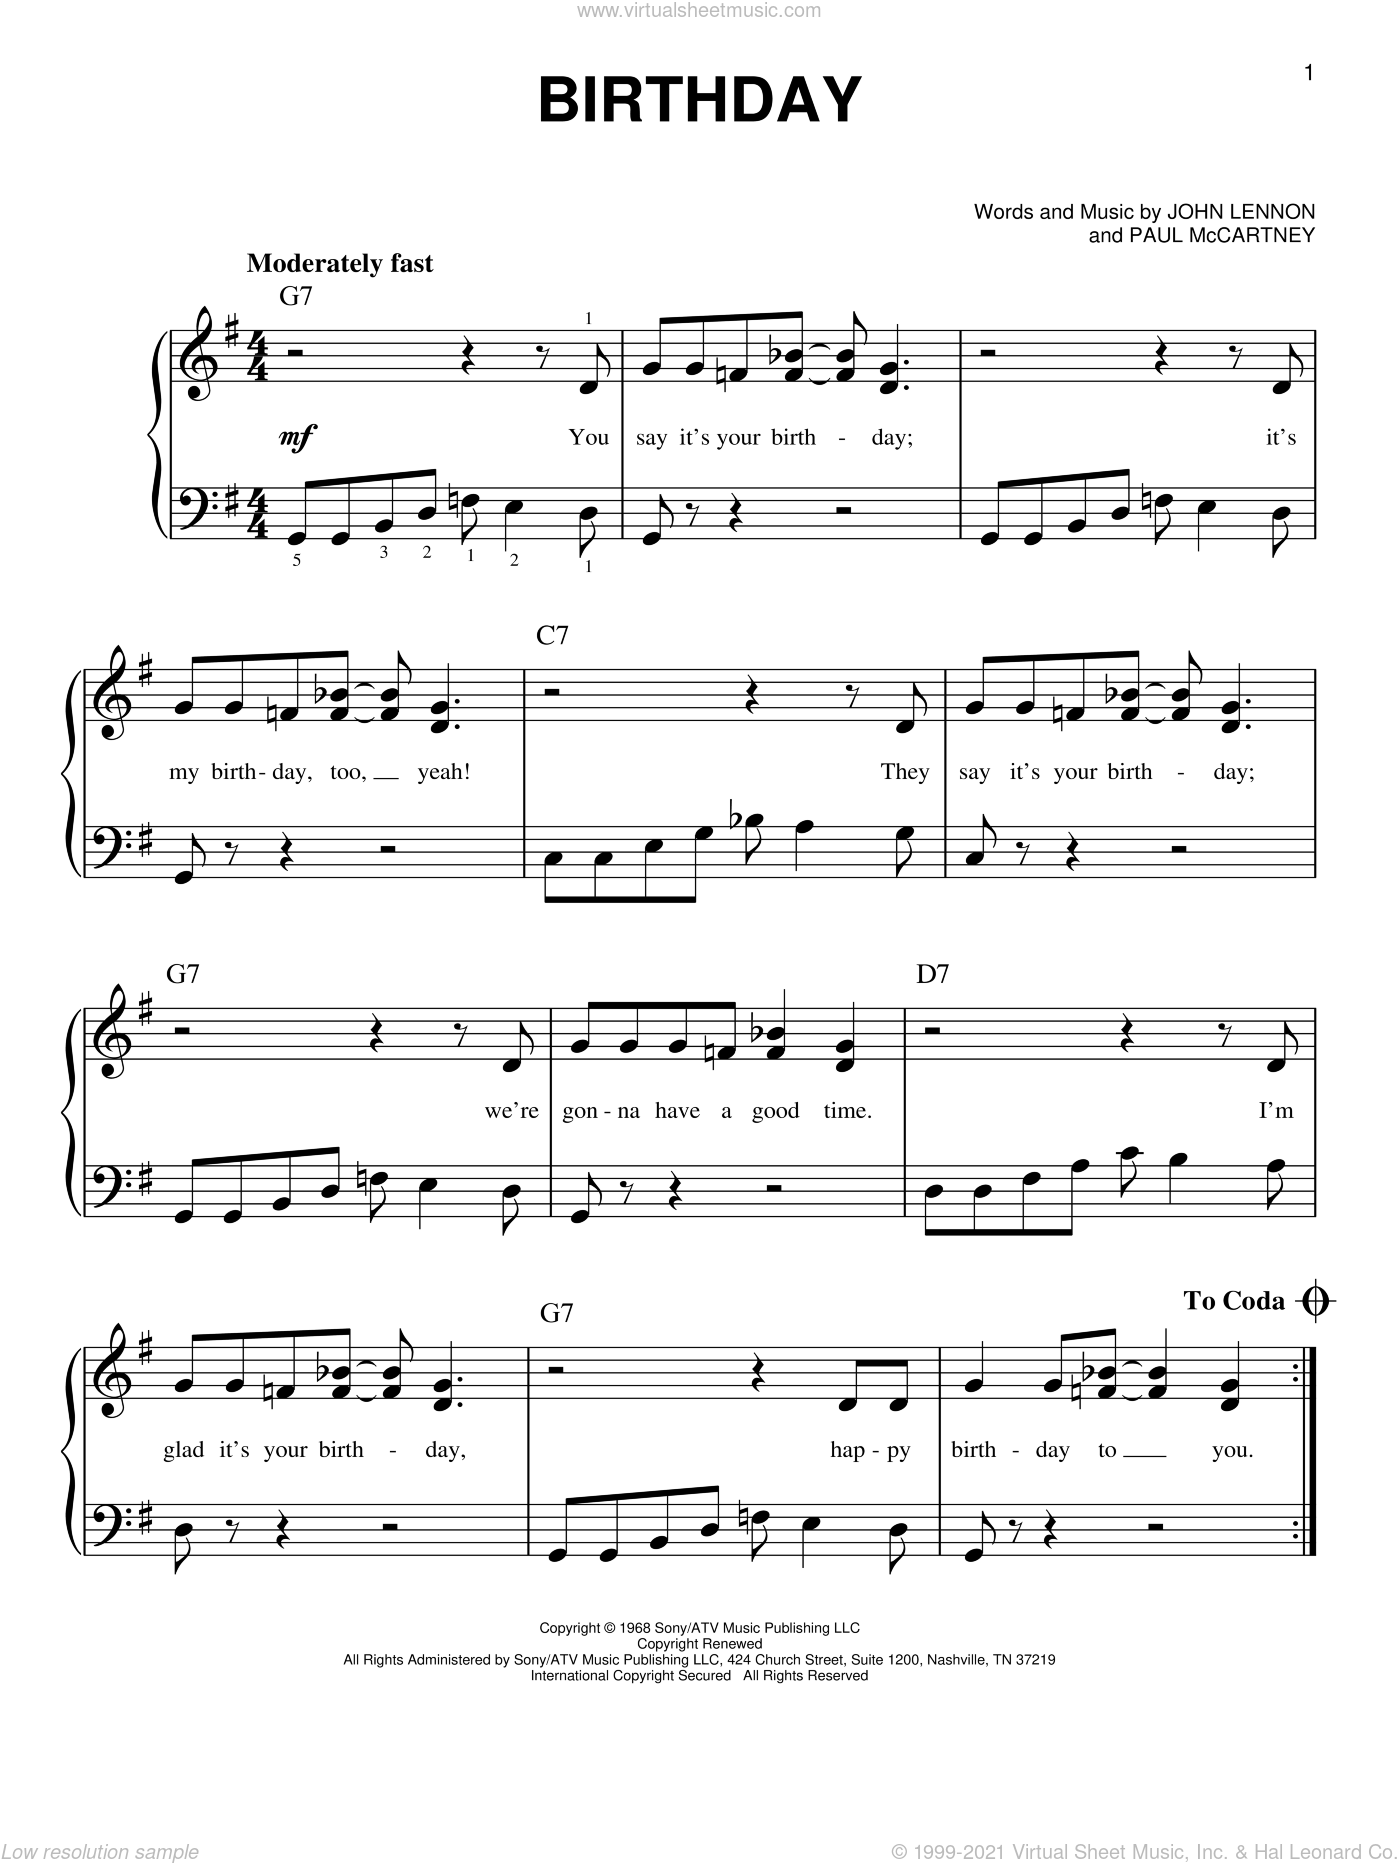 Beatles - Birthday sheet music for piano solo [PDF-interactive]